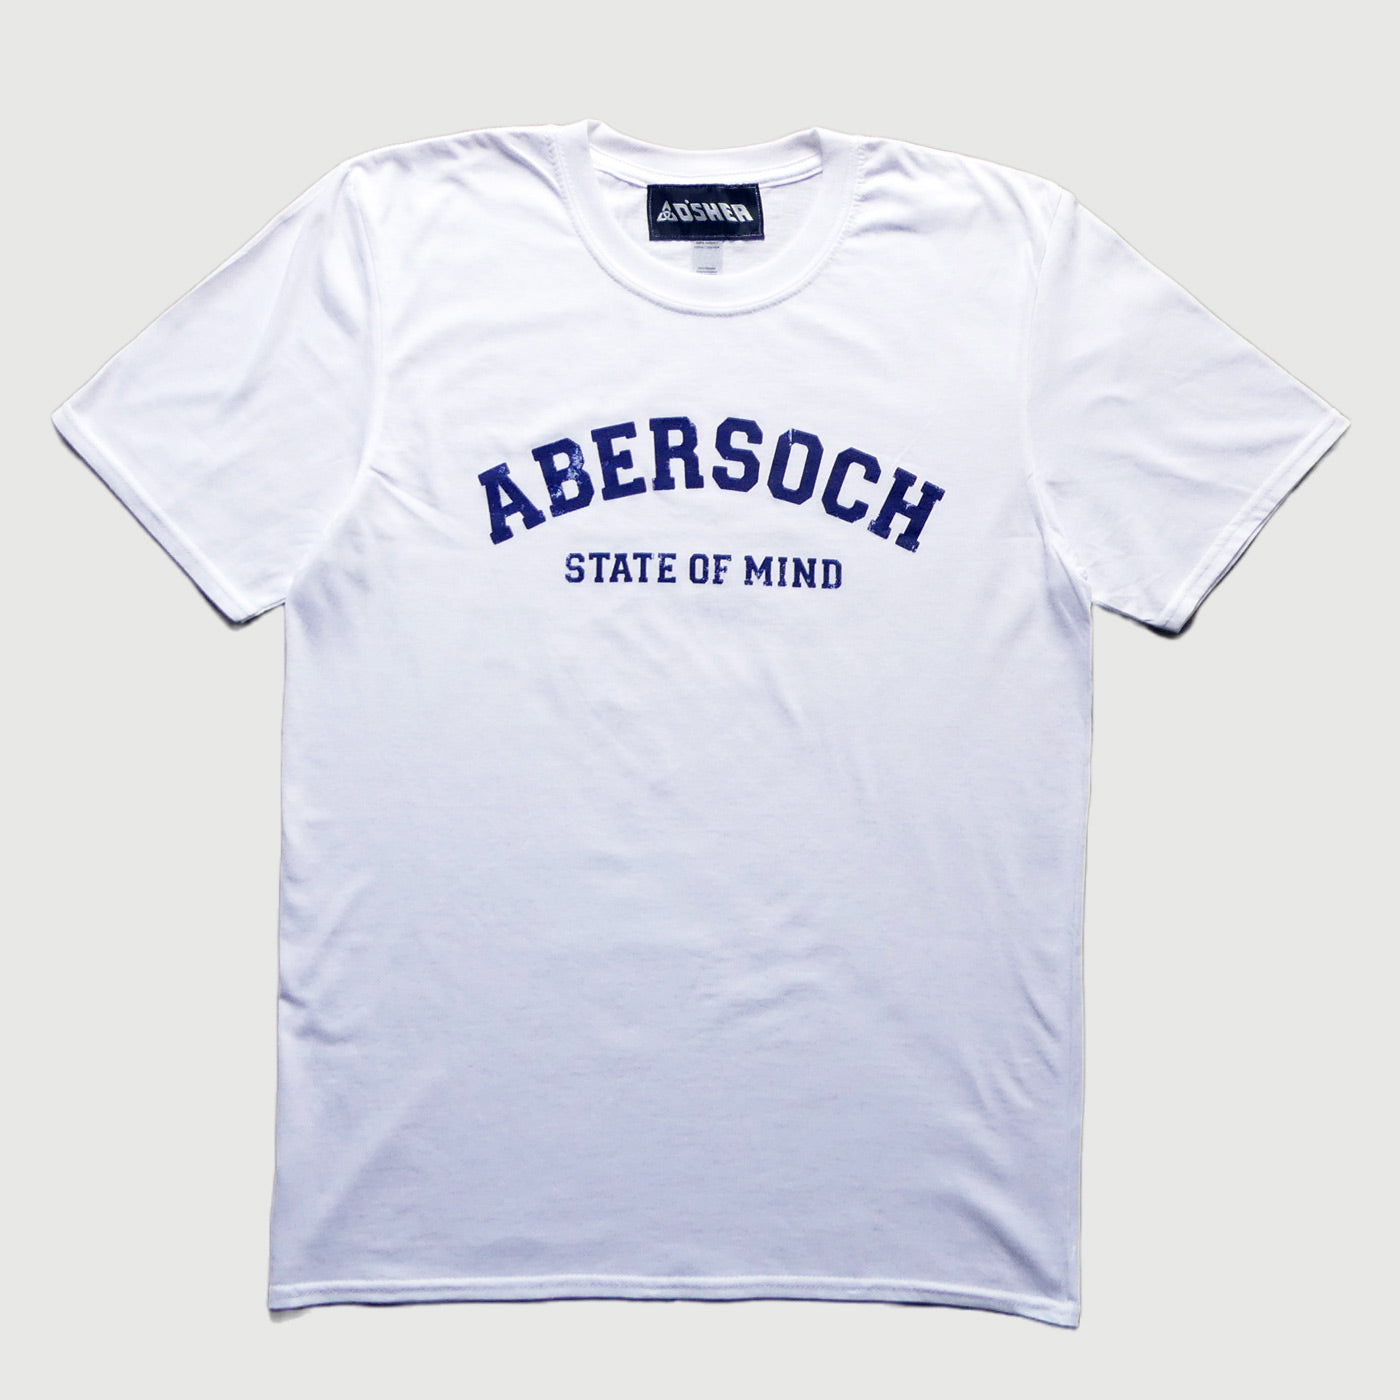 O'SHEA ABERSOCH MENS "STATE OF MIND" TEE - WHITE